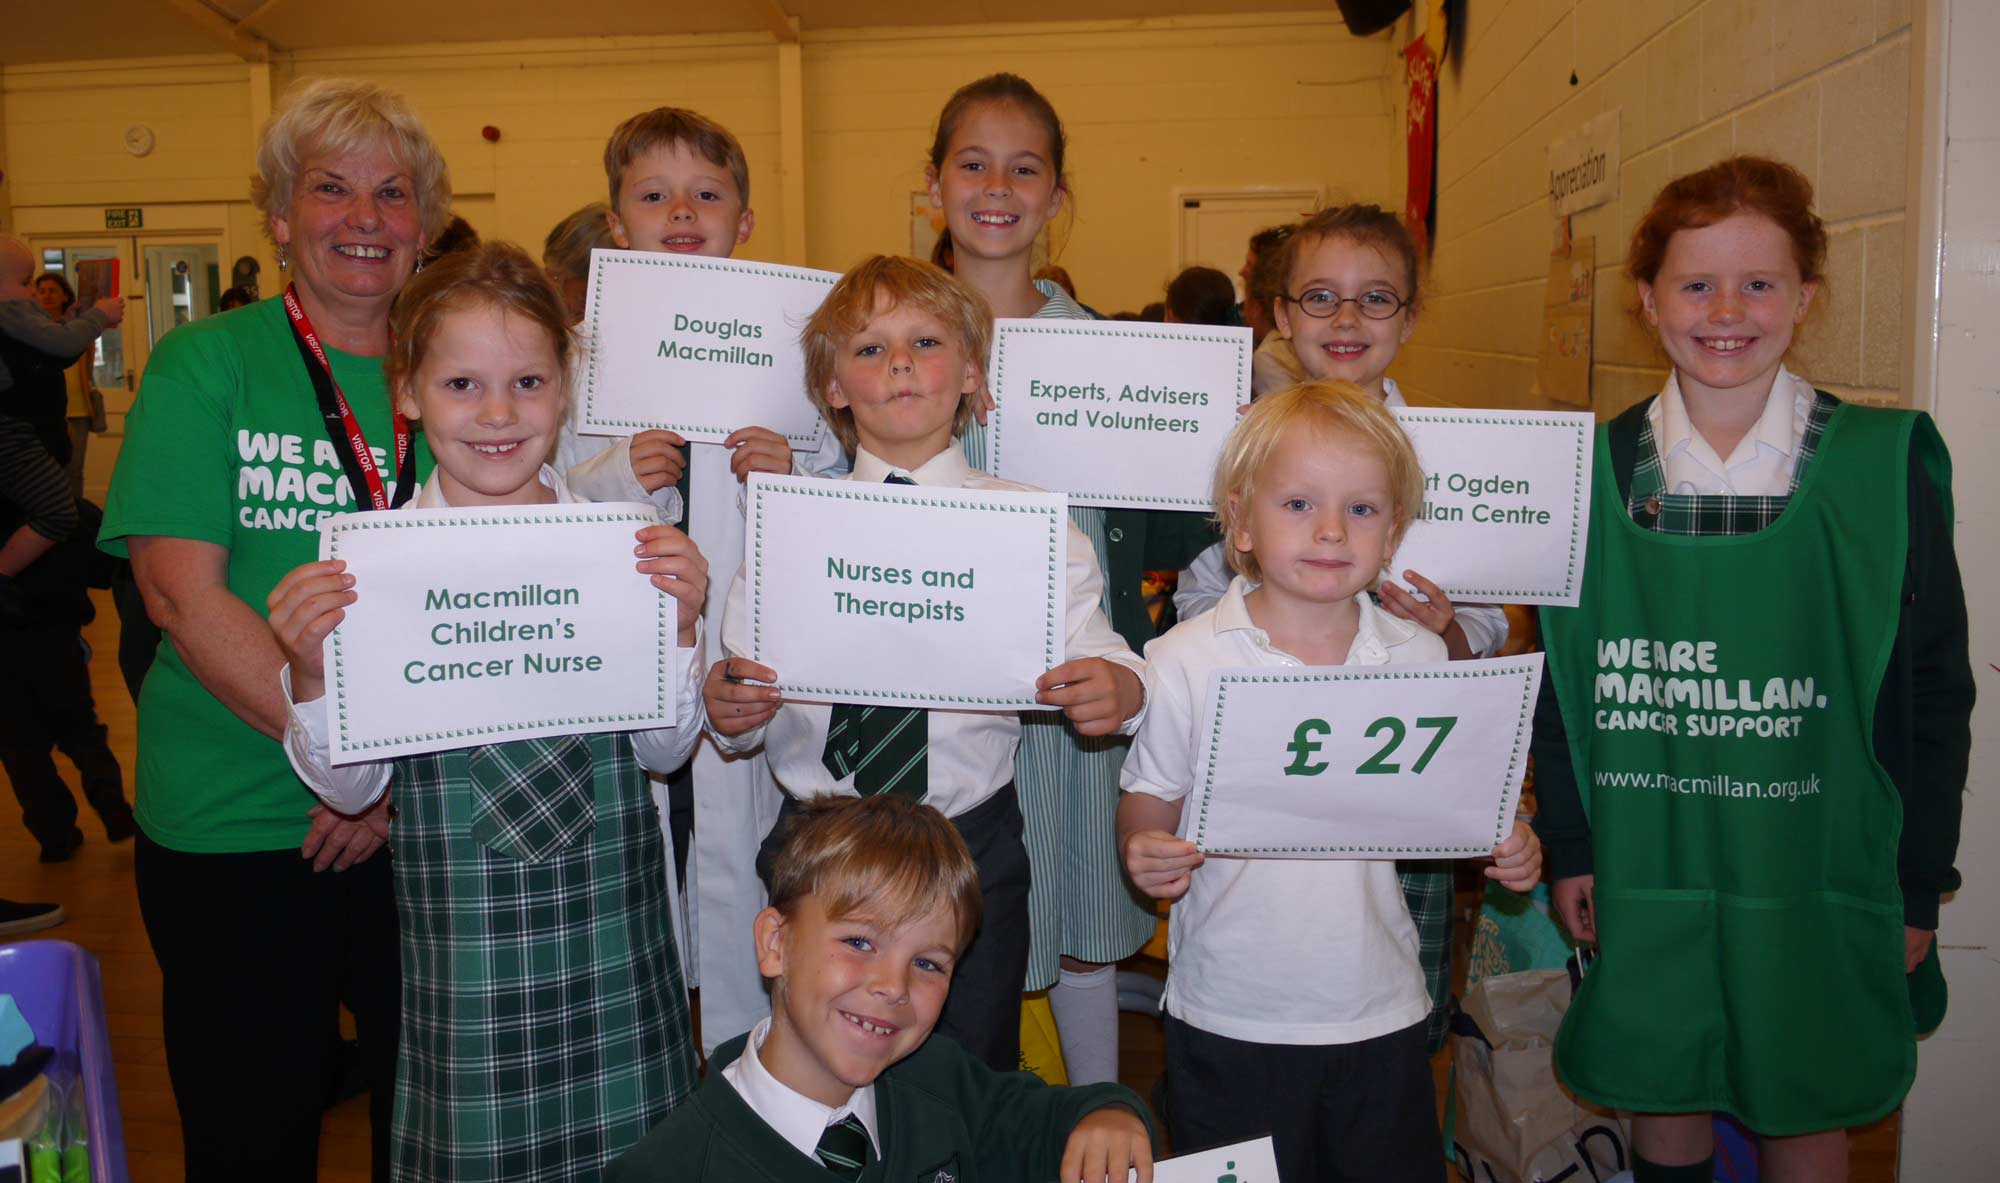 The photo shows volunteer Rosie with Brackenfield pupils who explained that the money raised will go towards funding a local MacMillan nurse that costs £26 an hour.